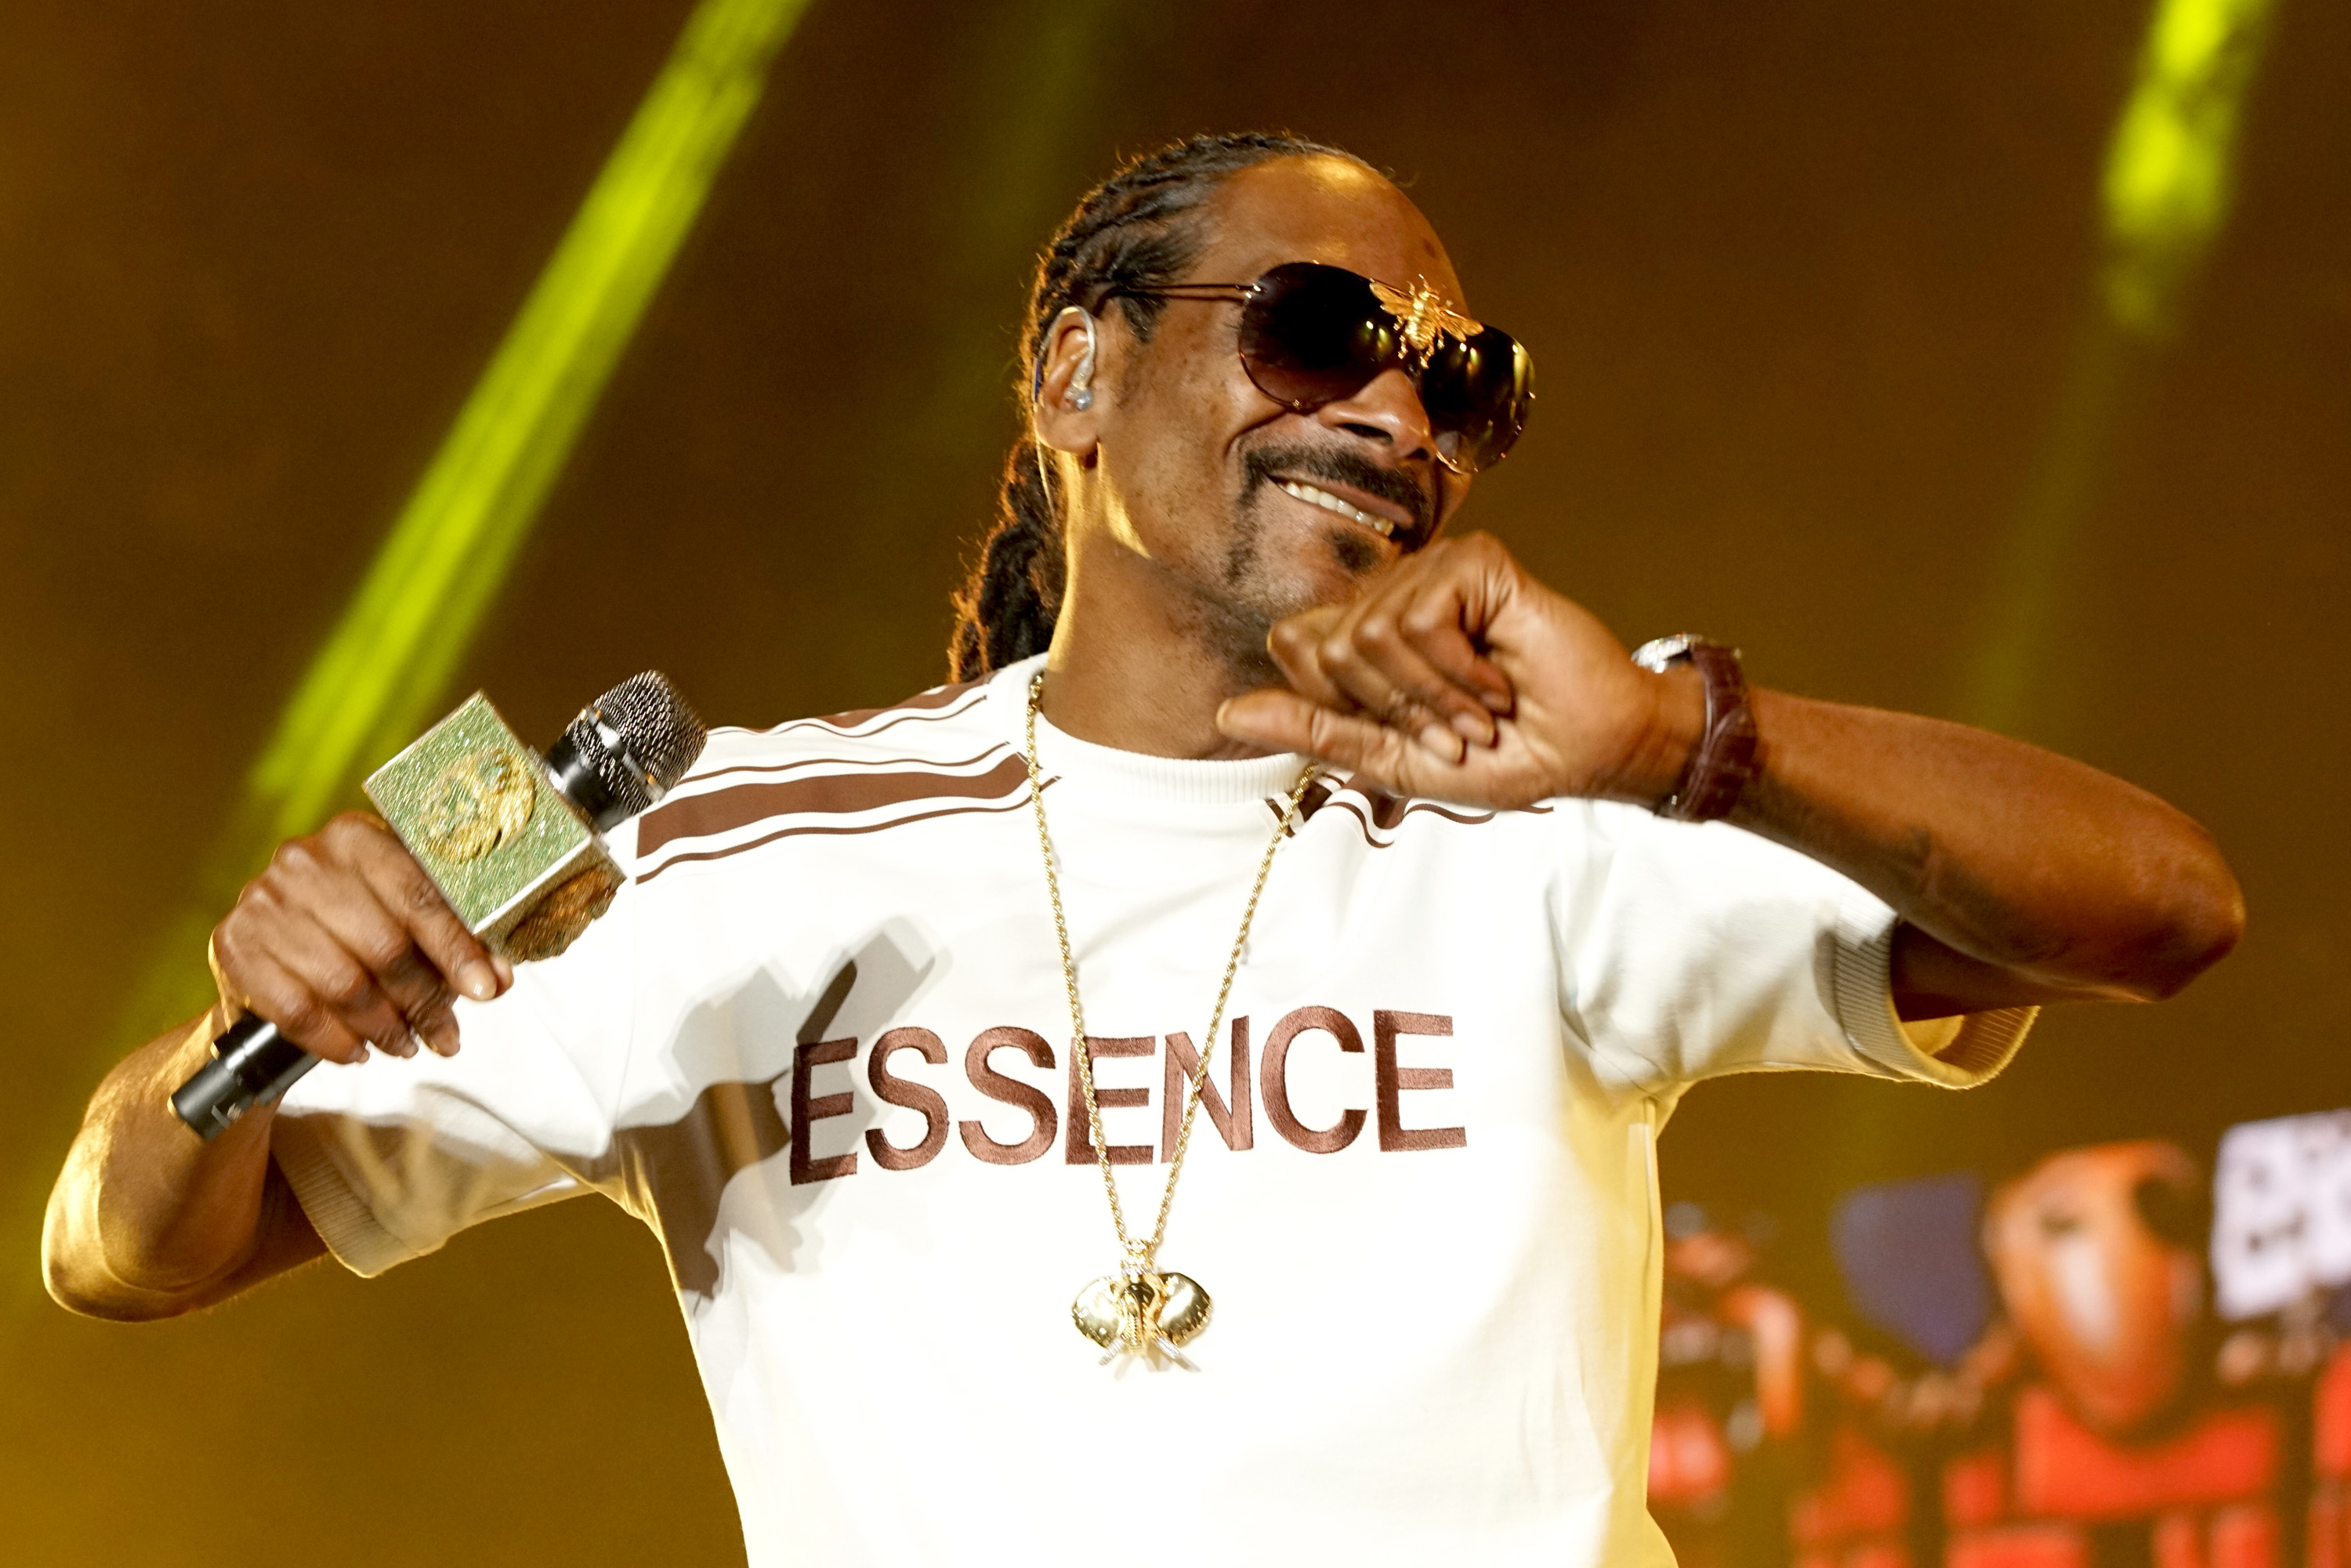 Snoop Dogg joins up with FaZe Clan - Entertainment